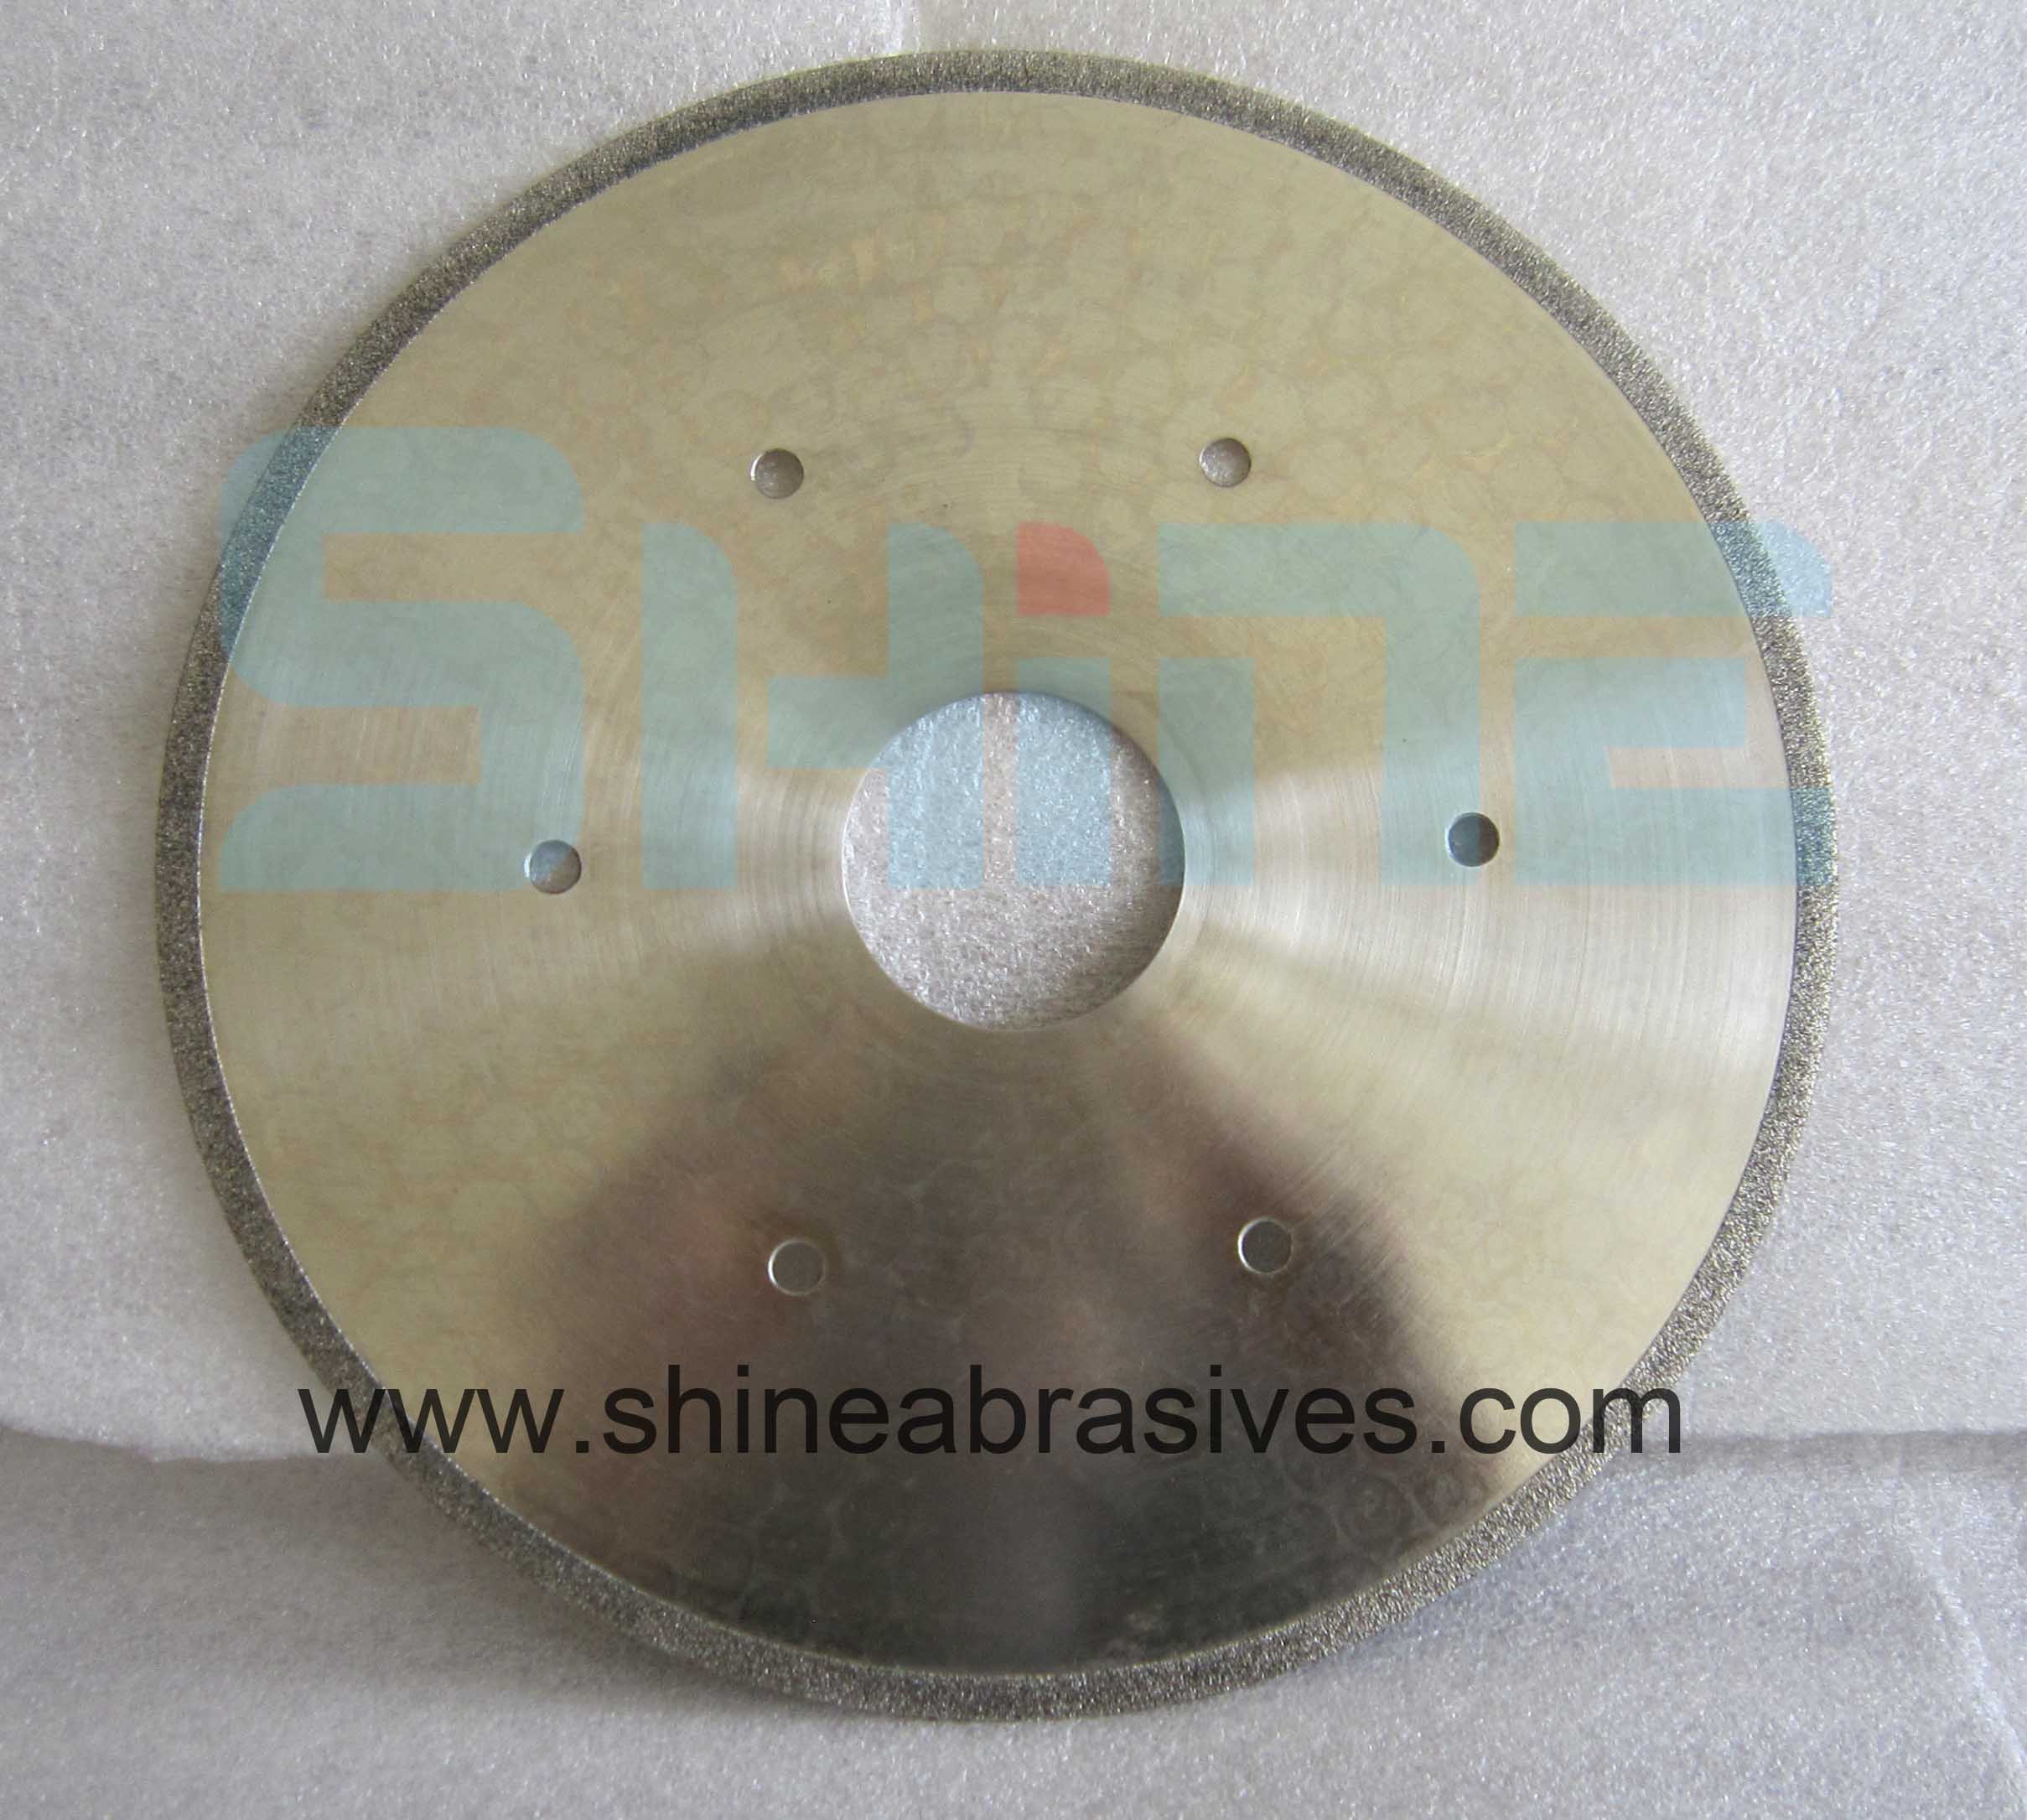 Elctroplated CBN cutting off wheel